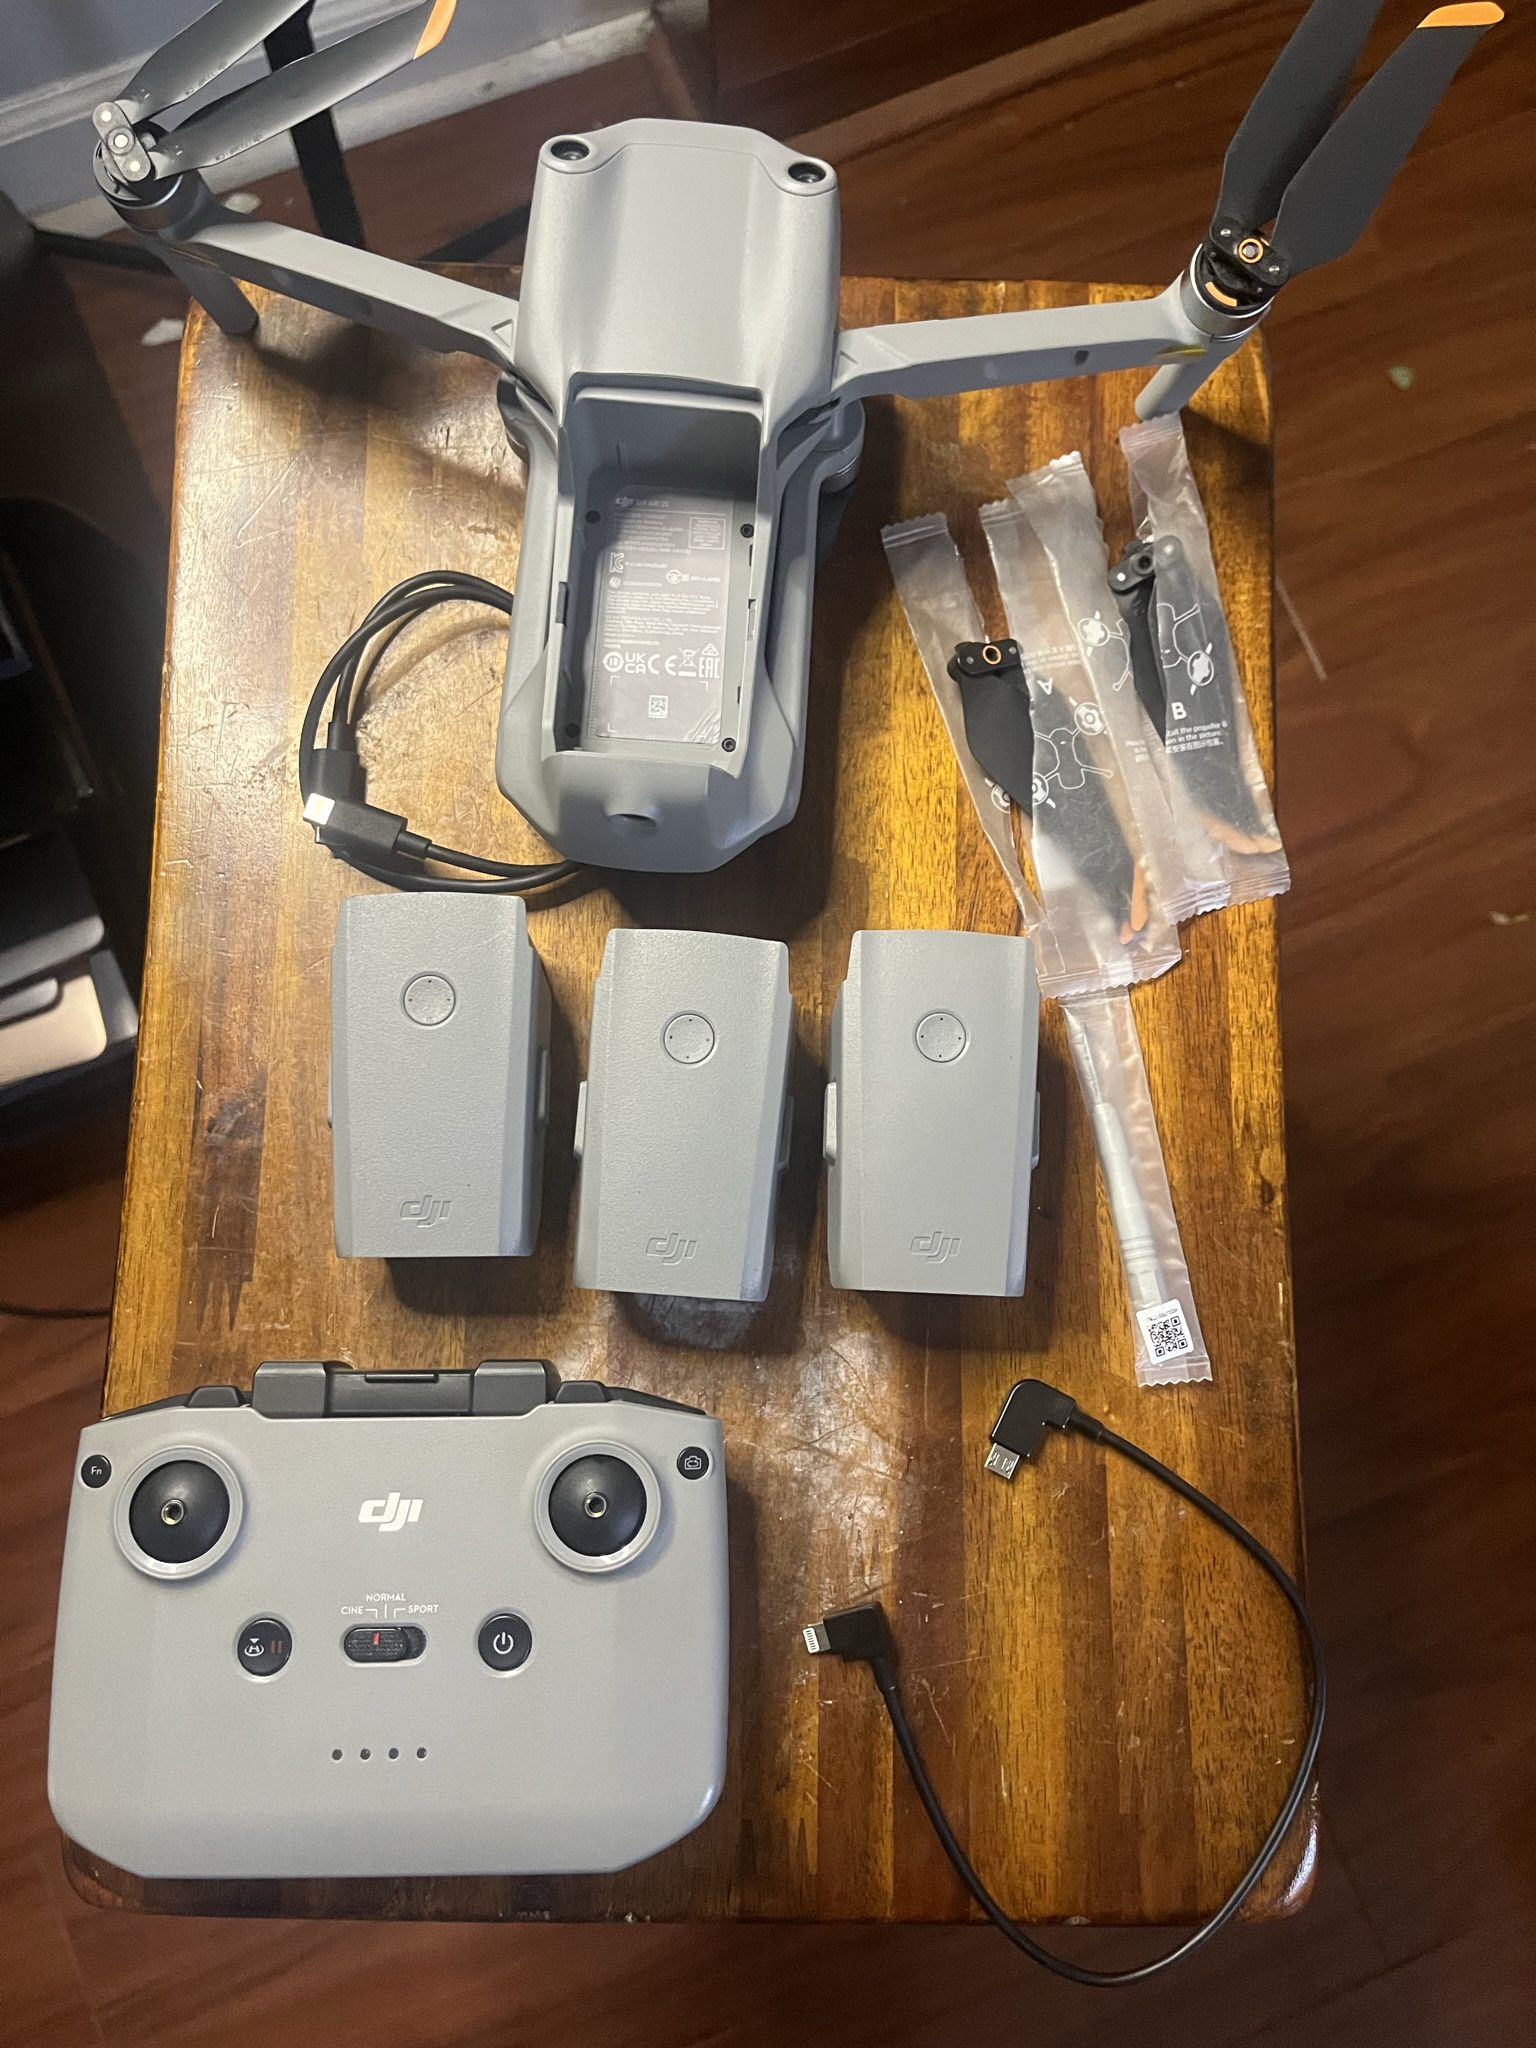 New DJI - Air 2S Fly More Combo Drone with Remote Control - Gray, 3 Separate Battery, Adapter For iPhone (NEVER BEEN USED)